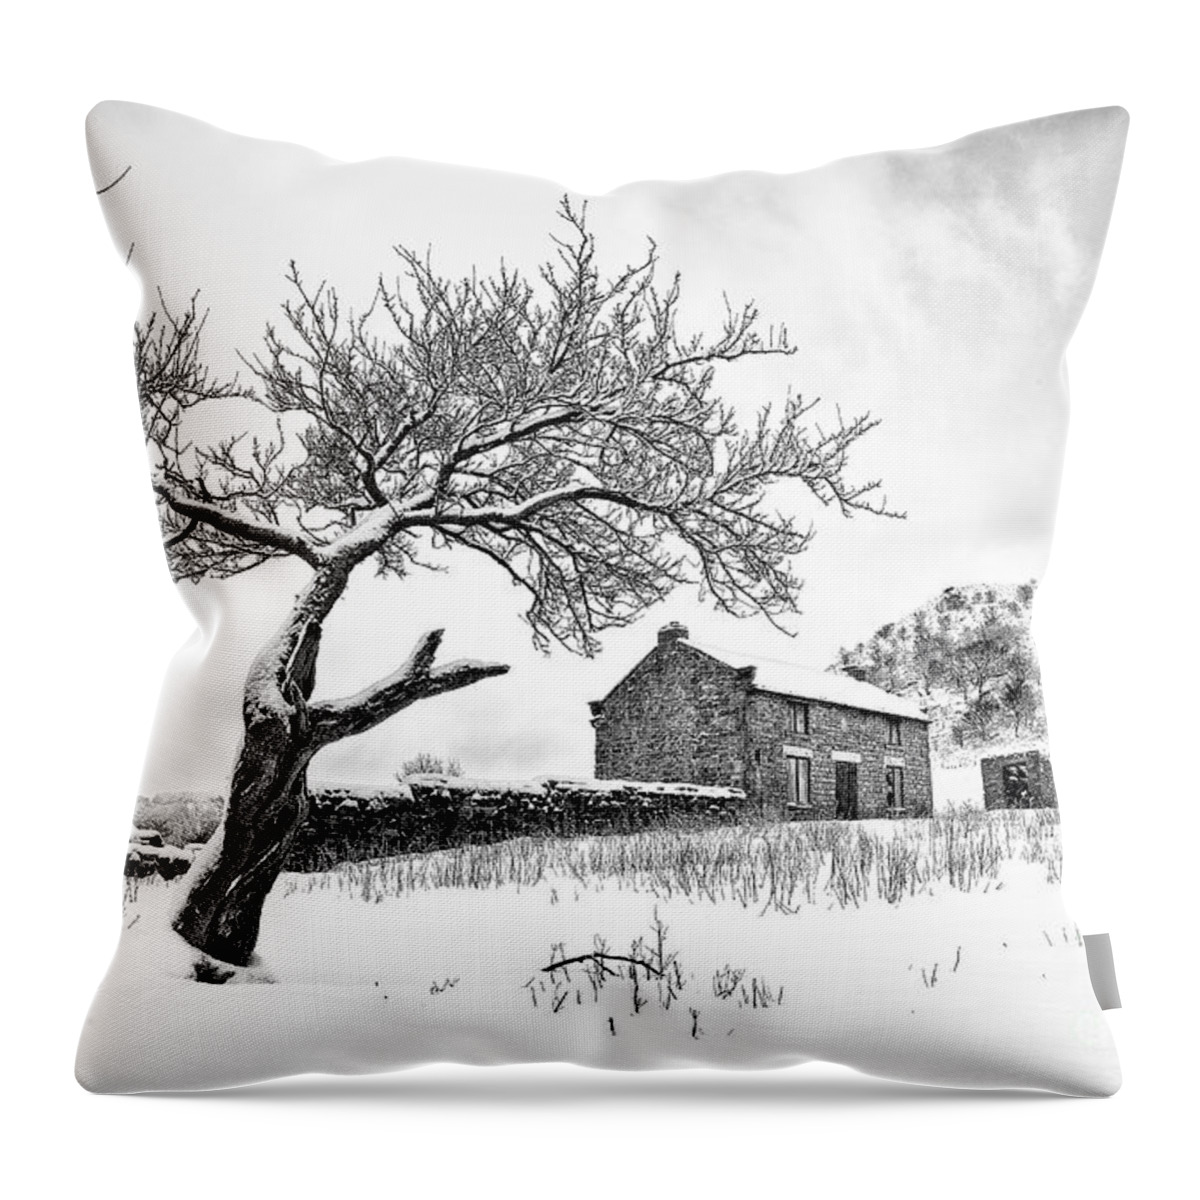 January Throw Pillow featuring the photograph Low Horcum by Richard Burdon